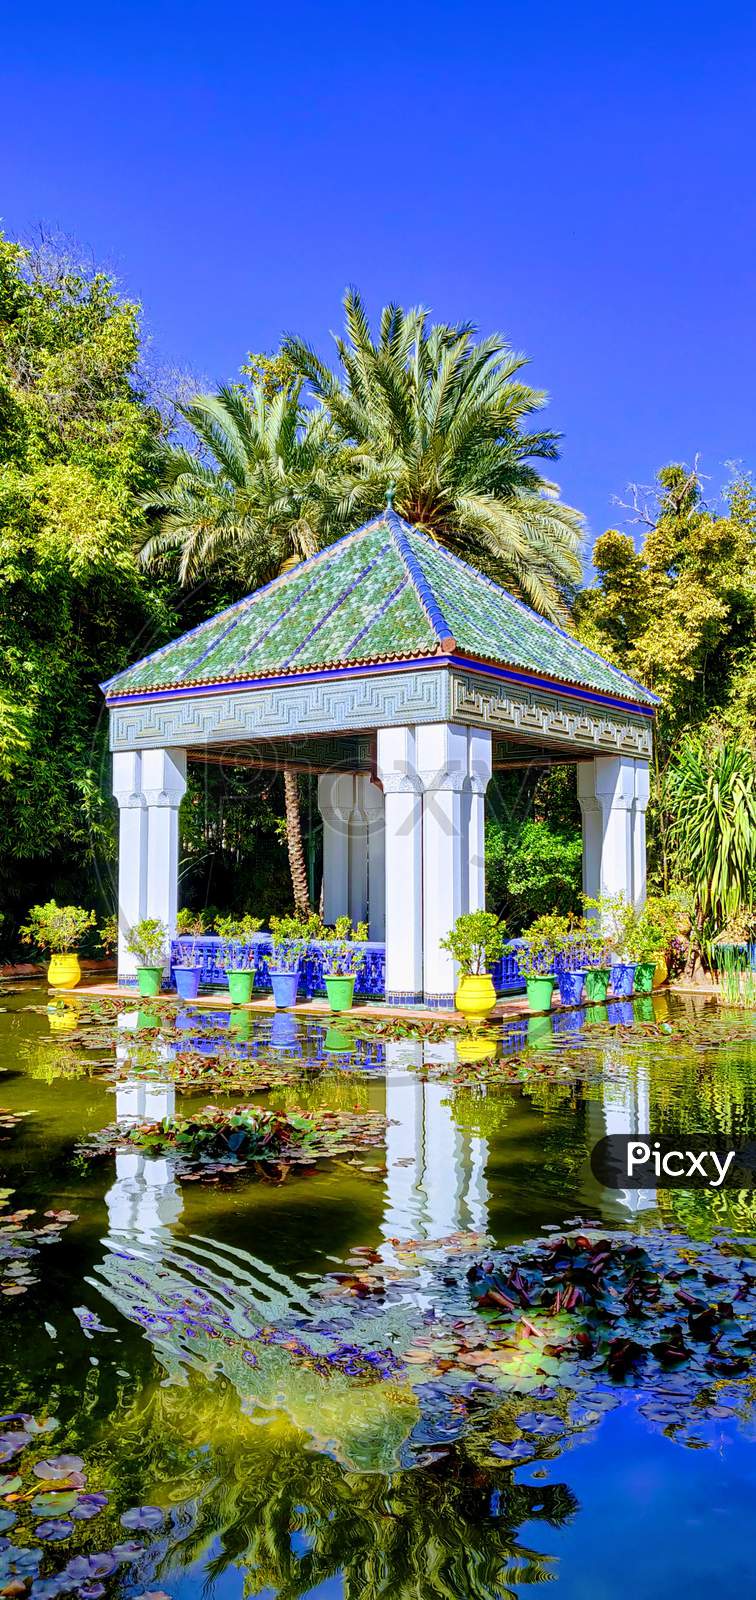 A Mandap In Middle Of Pond in an Mosque Compound at El Borma , Algeria